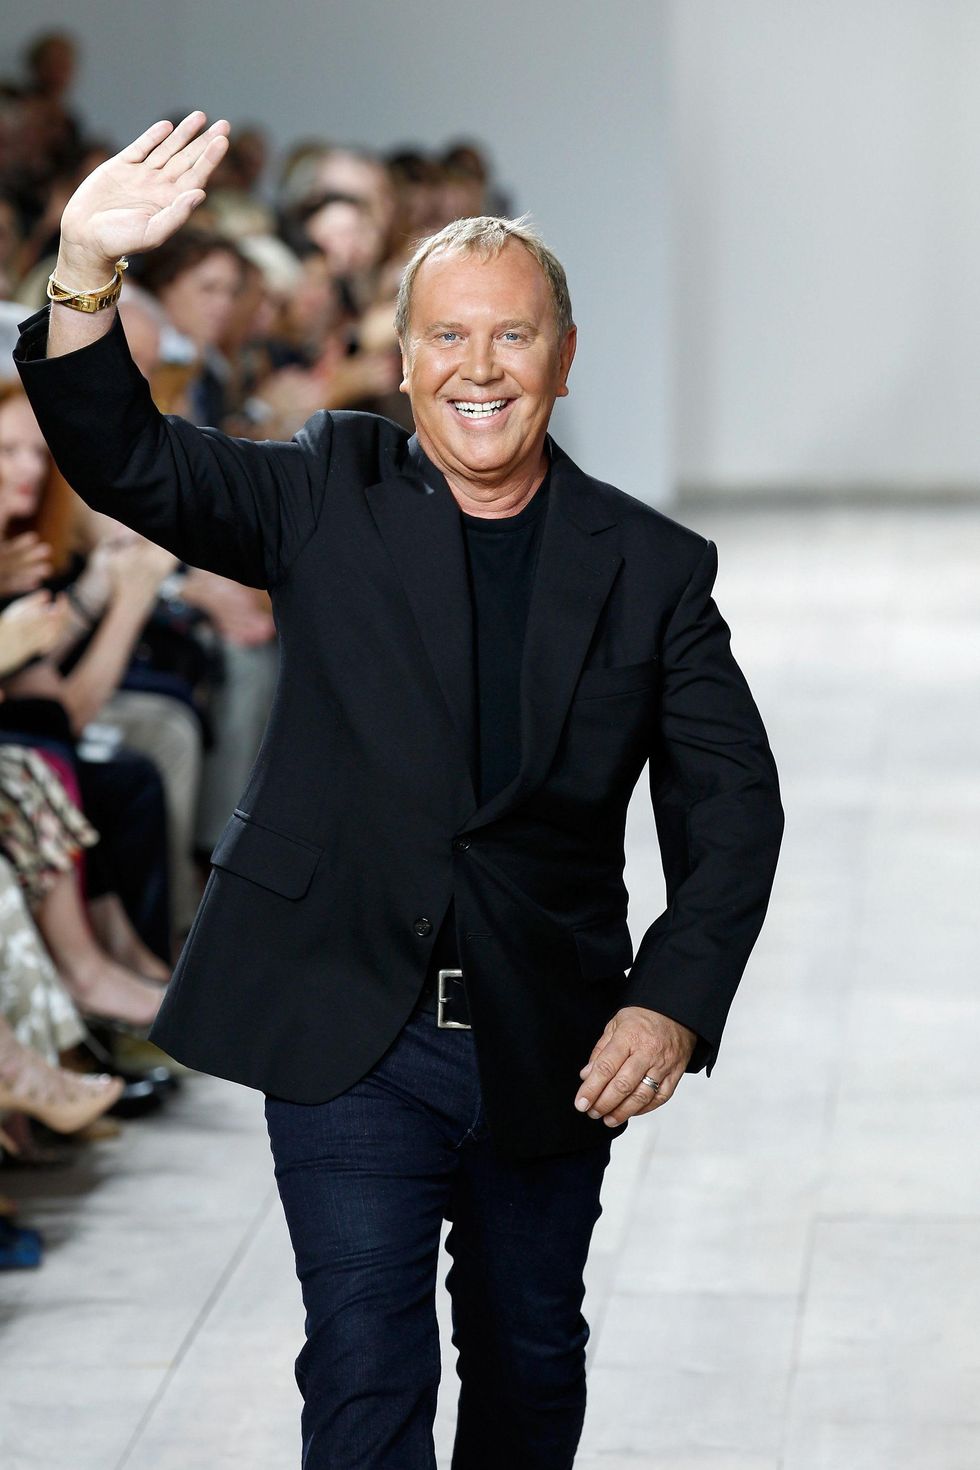 Michael Kors on the runway after showing of his spring collection